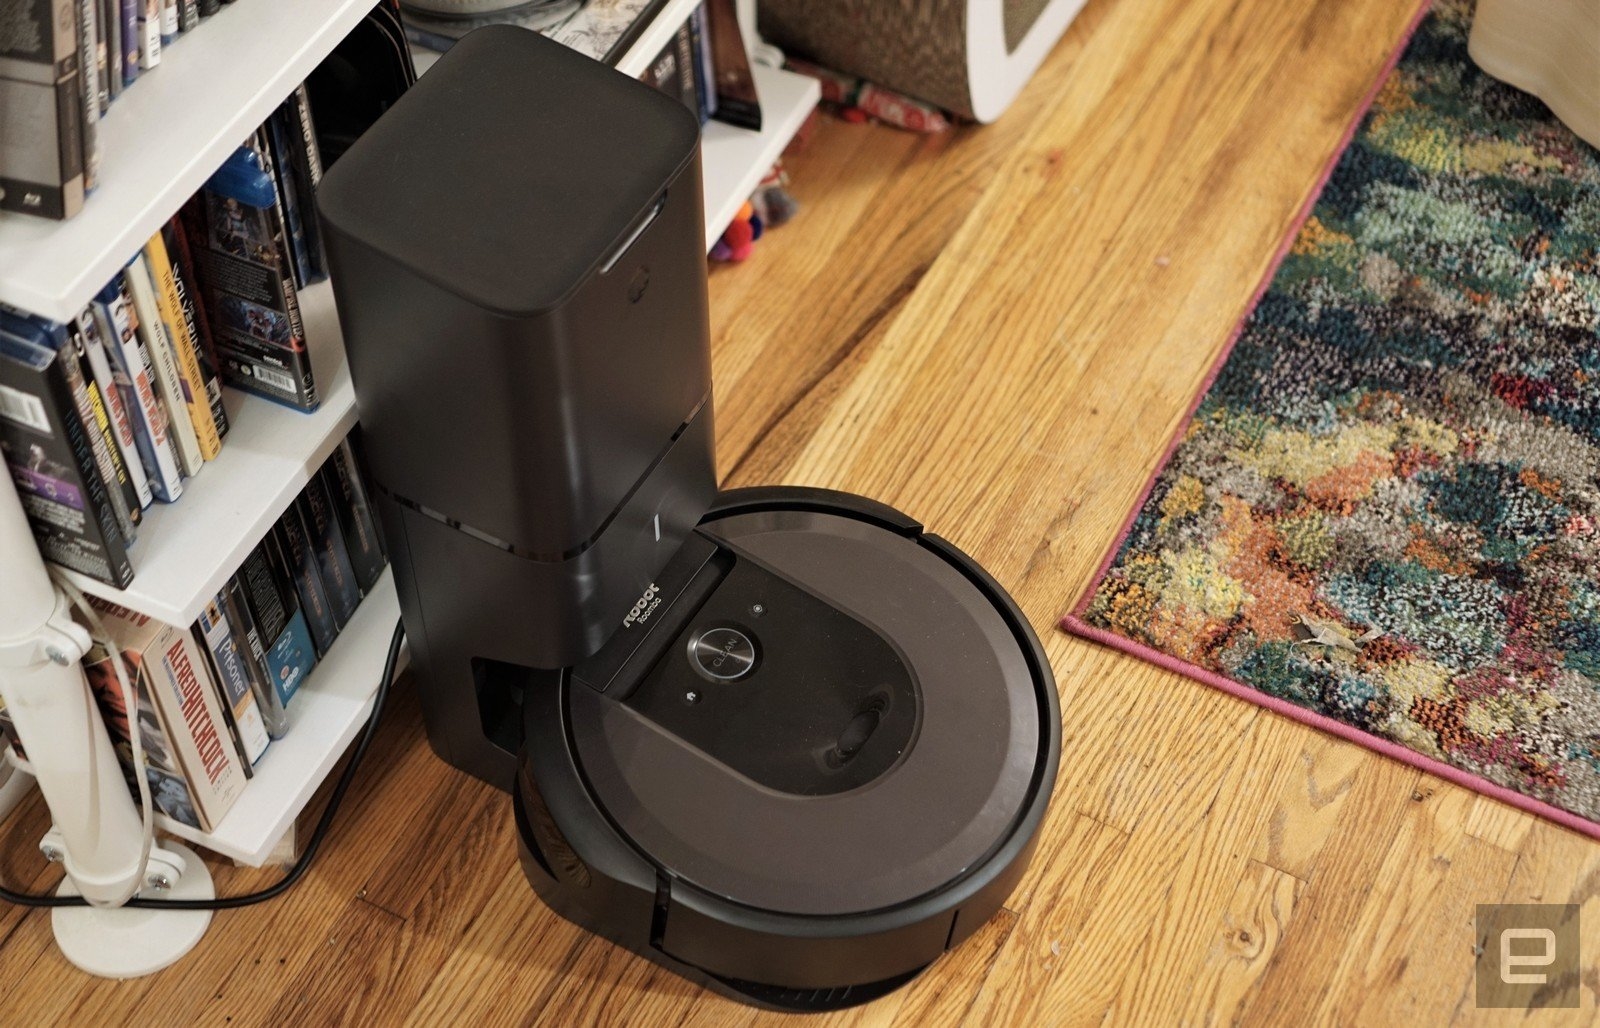 Roomba update tells your robovacs to steer clear of trouble spots | DeviceDaily.com